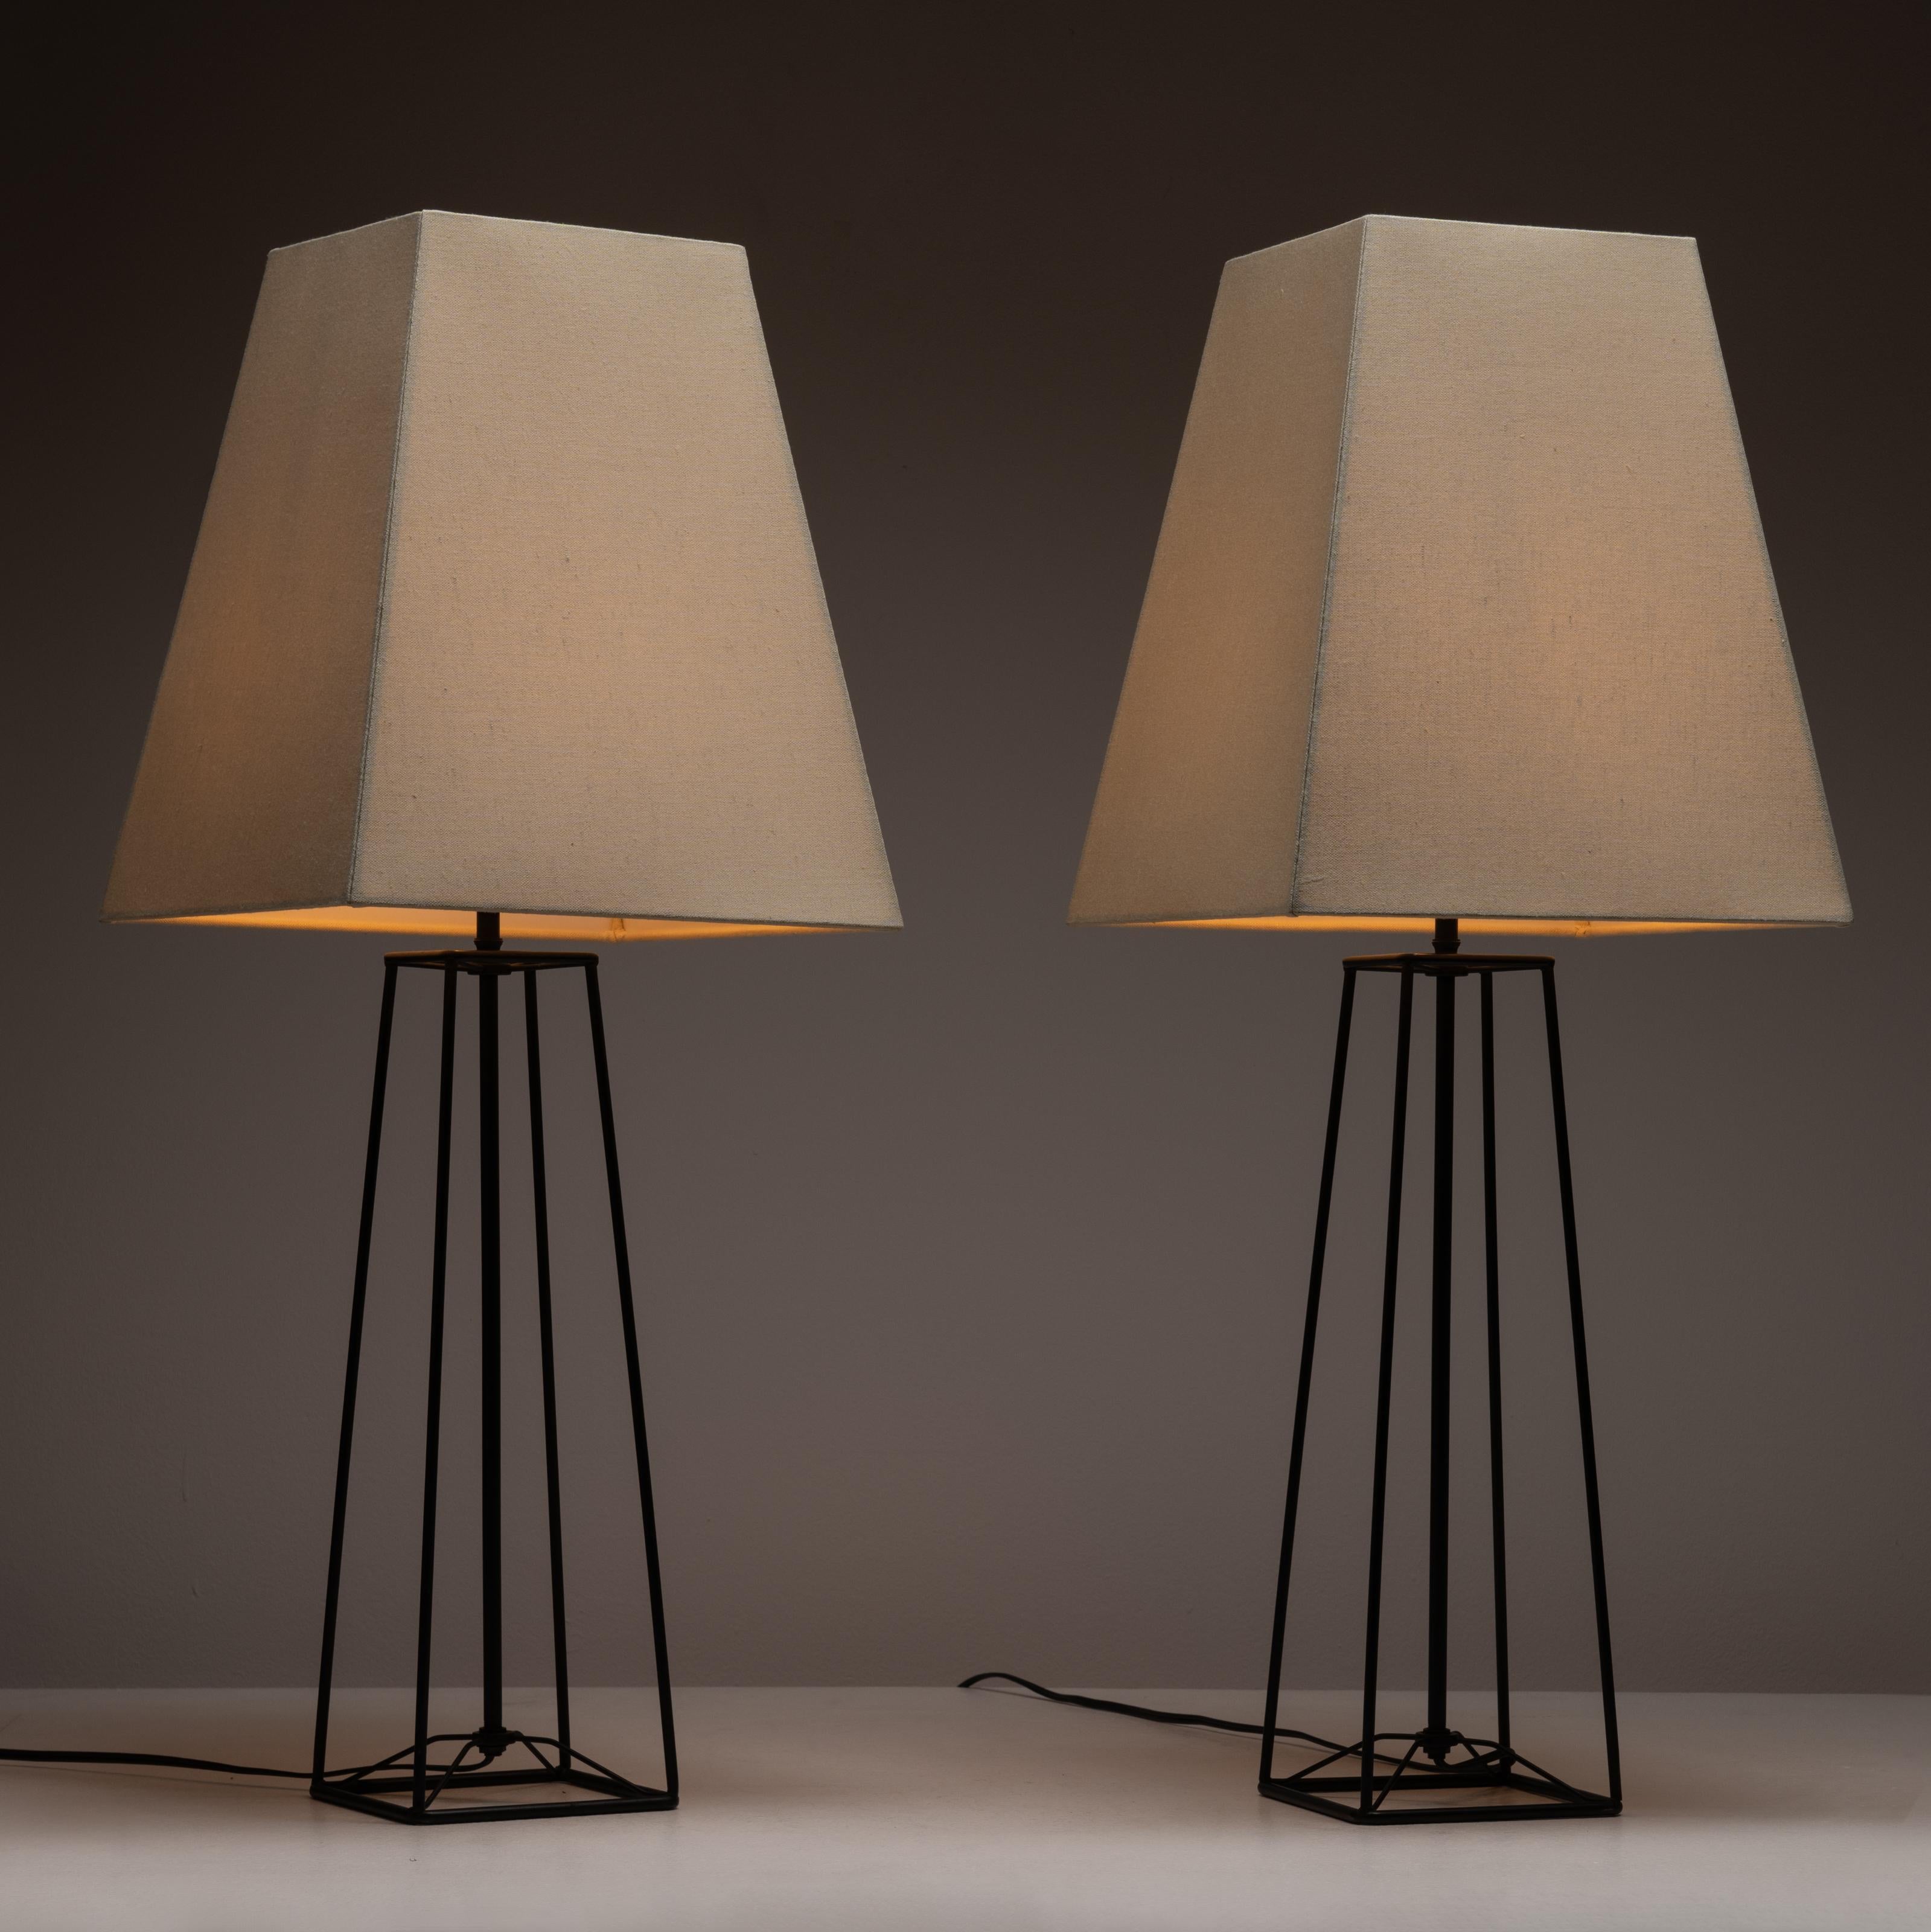 Table lamps by Harry Lawenda for Kneedler-Fauchère. Open-body, geometric iron table lamps that strike a perfect balance between minimal and industrial. New boxy linen shades have been fabricated for the pair. The table lamps each hold one E27 bulb